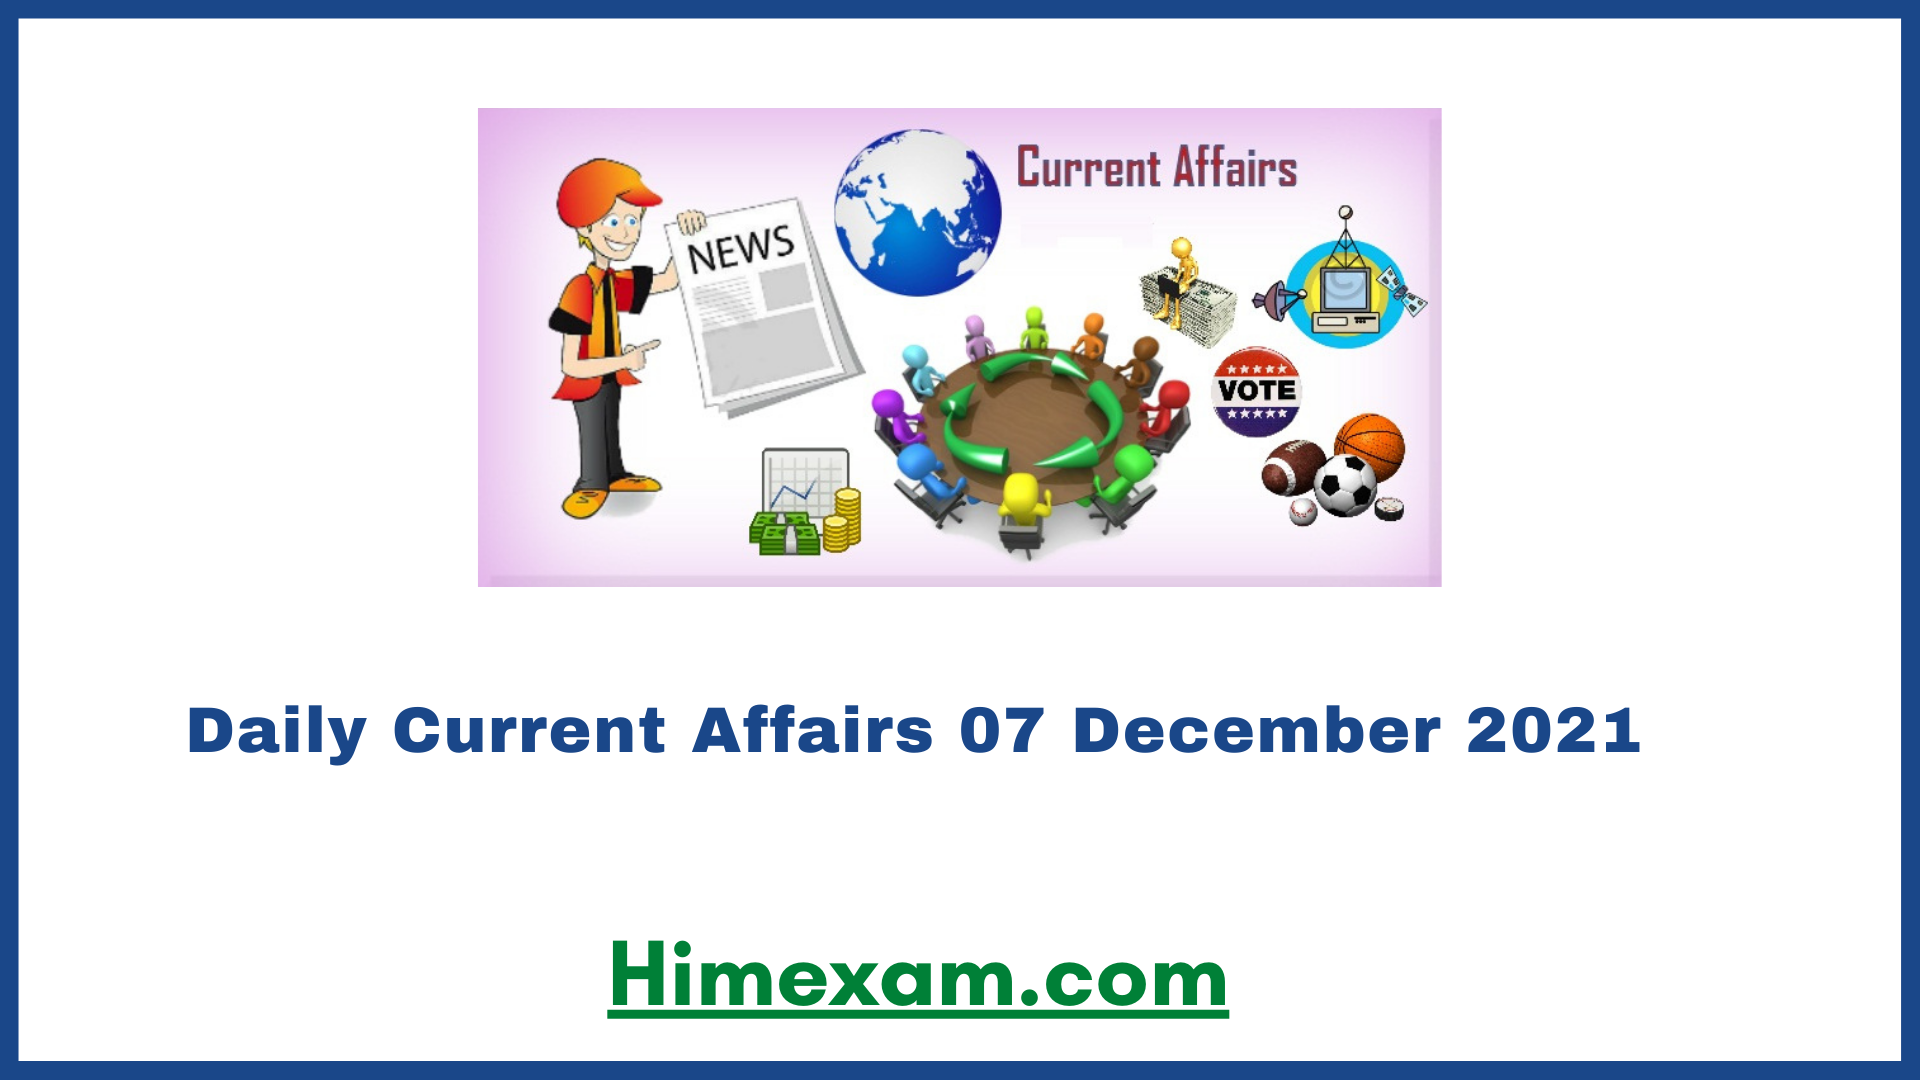 Daily Current Affairs 07 December 2021